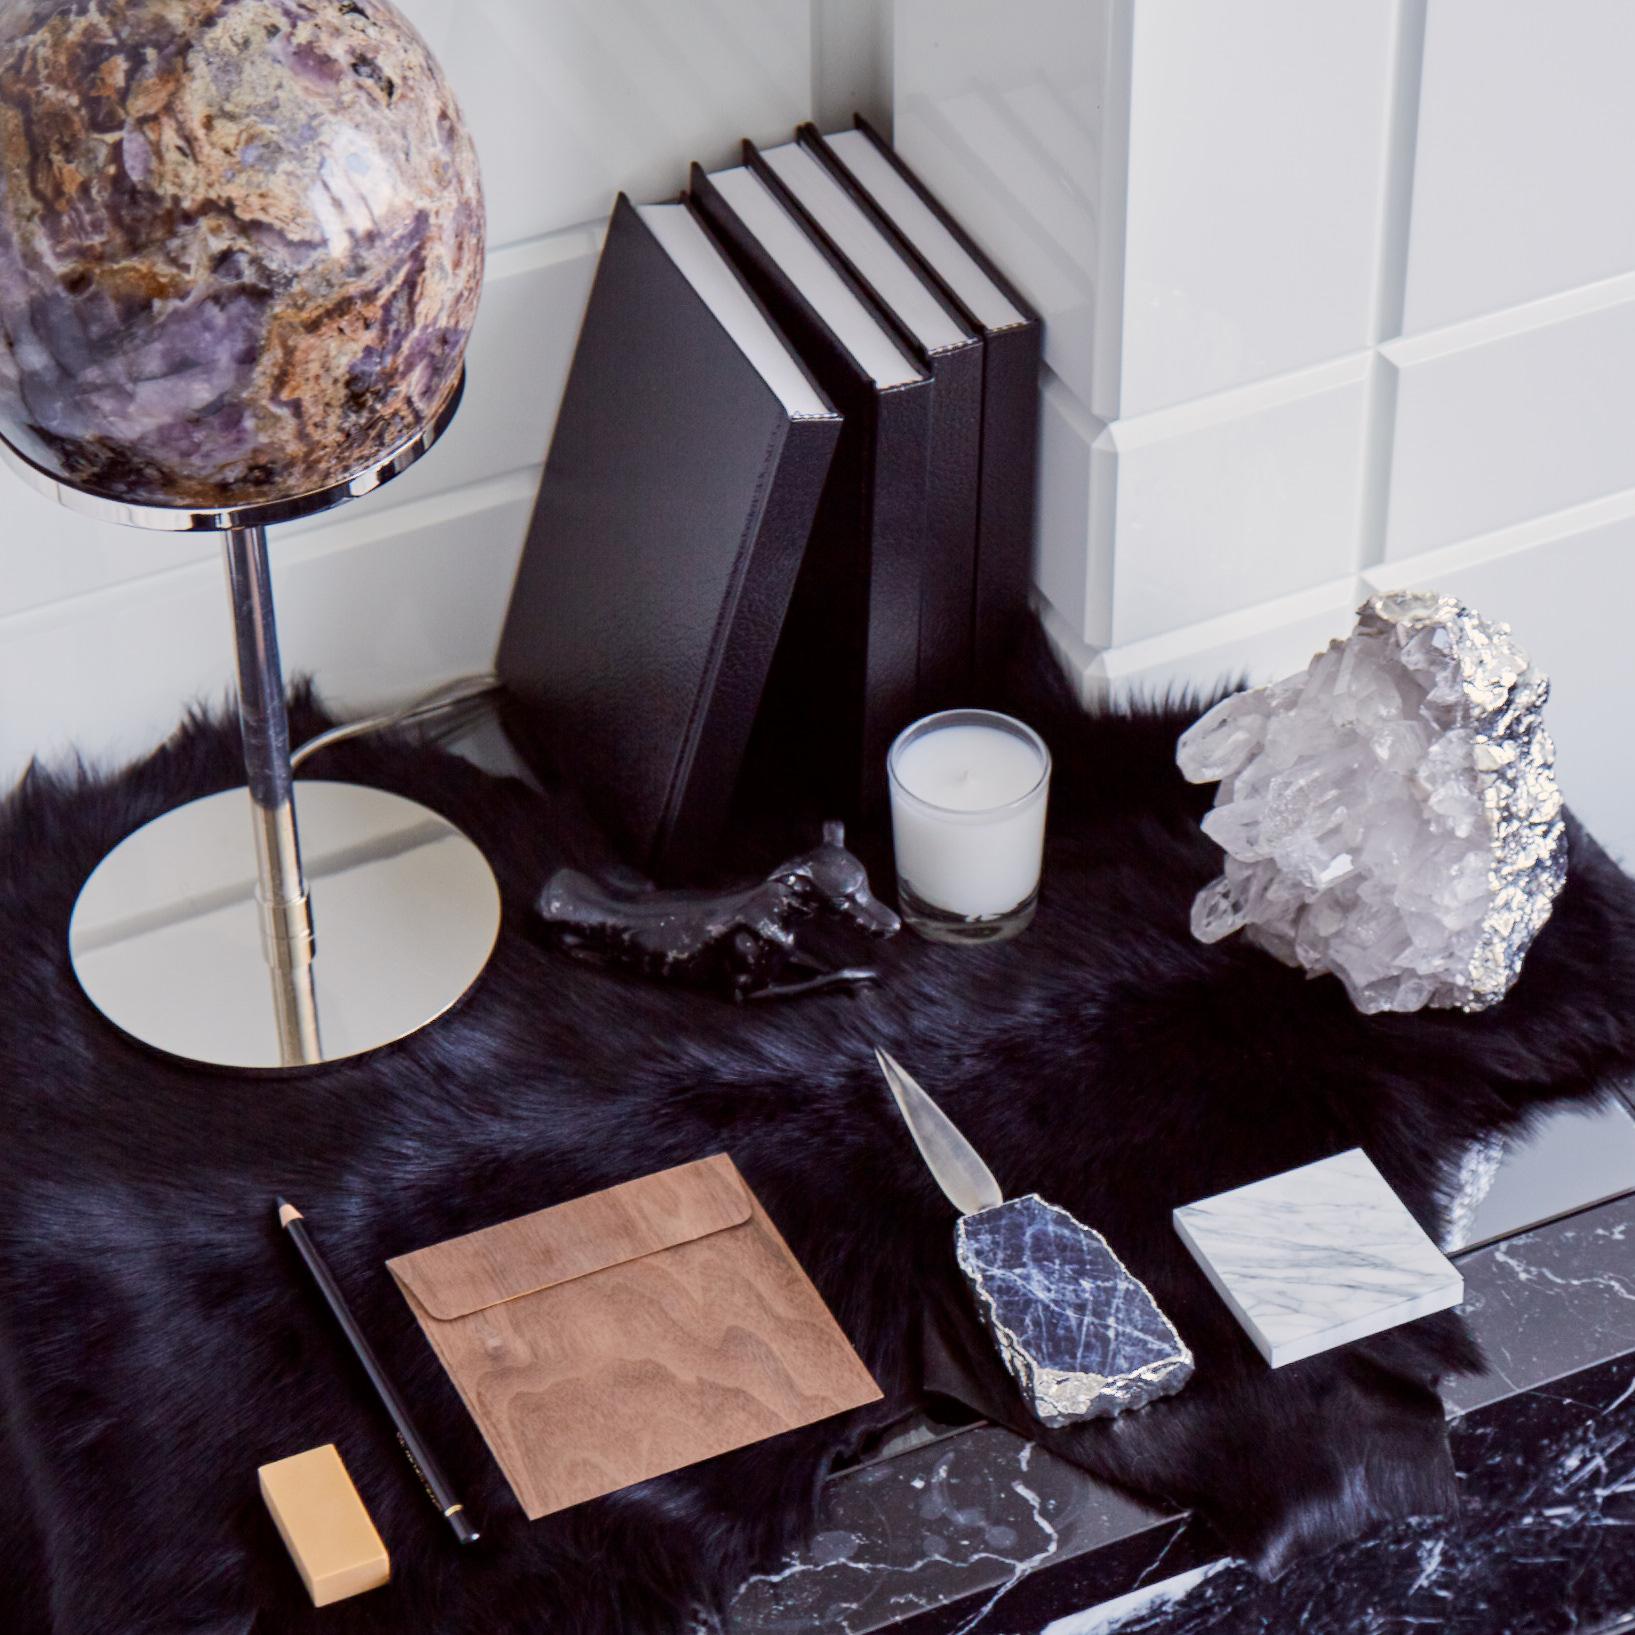 Combining the luxurious touch of gemstones with pure silver and 24 karat gold, hand-carved optical glass, and stainless steel, the ampliar family includes decorative yet functional accessories for any office desk. Our letter opener, inspired by